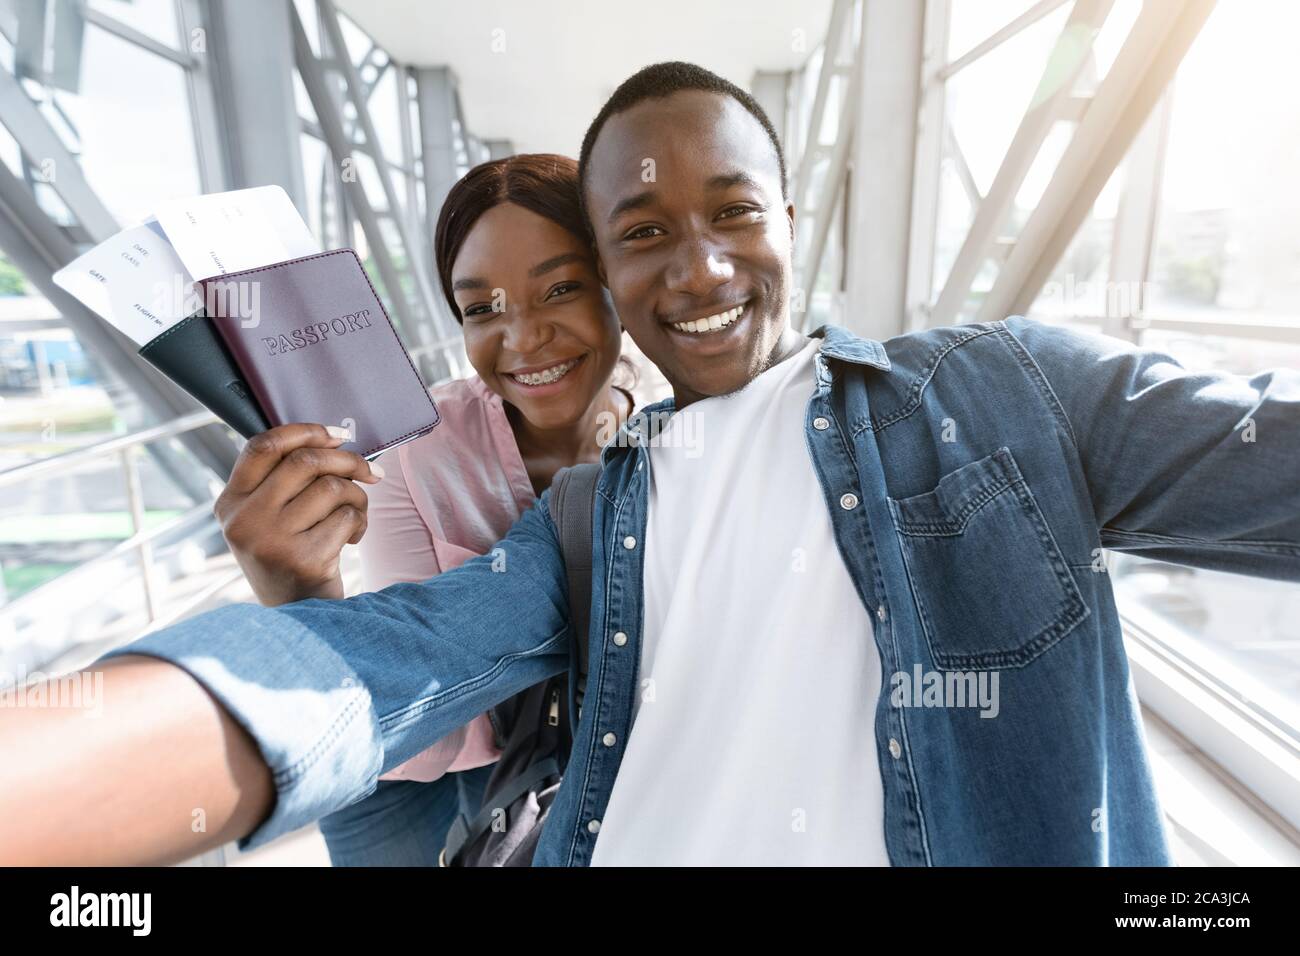 Excited Black Couple Making Selfie In Airport While Waiting For Thier Flight Stock Photo